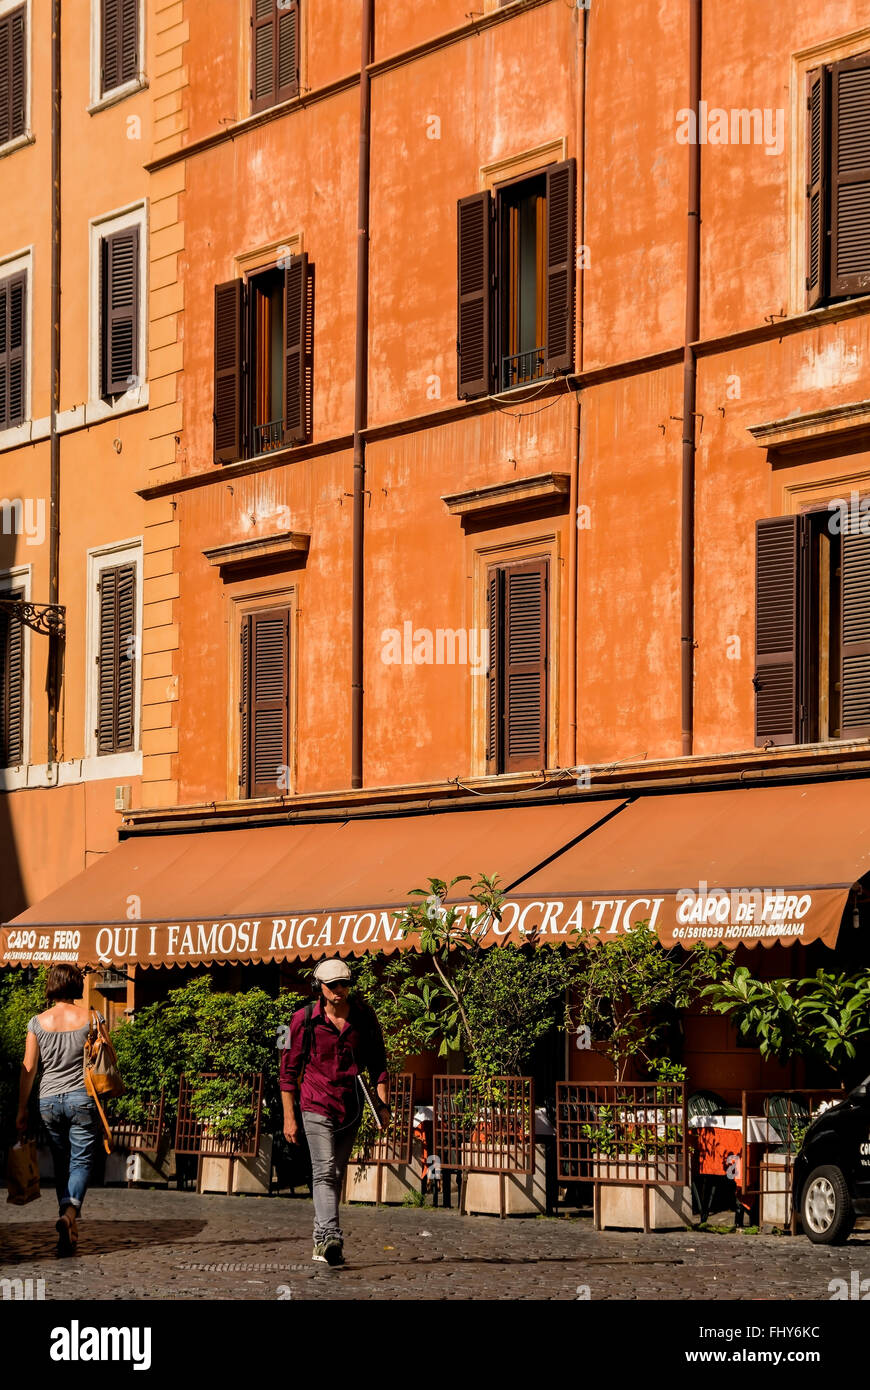 A typical street with stucco'd buildings in Rome, Italy. This is the capo de Fero restaurant on Via San Cosimato. Stock Photo